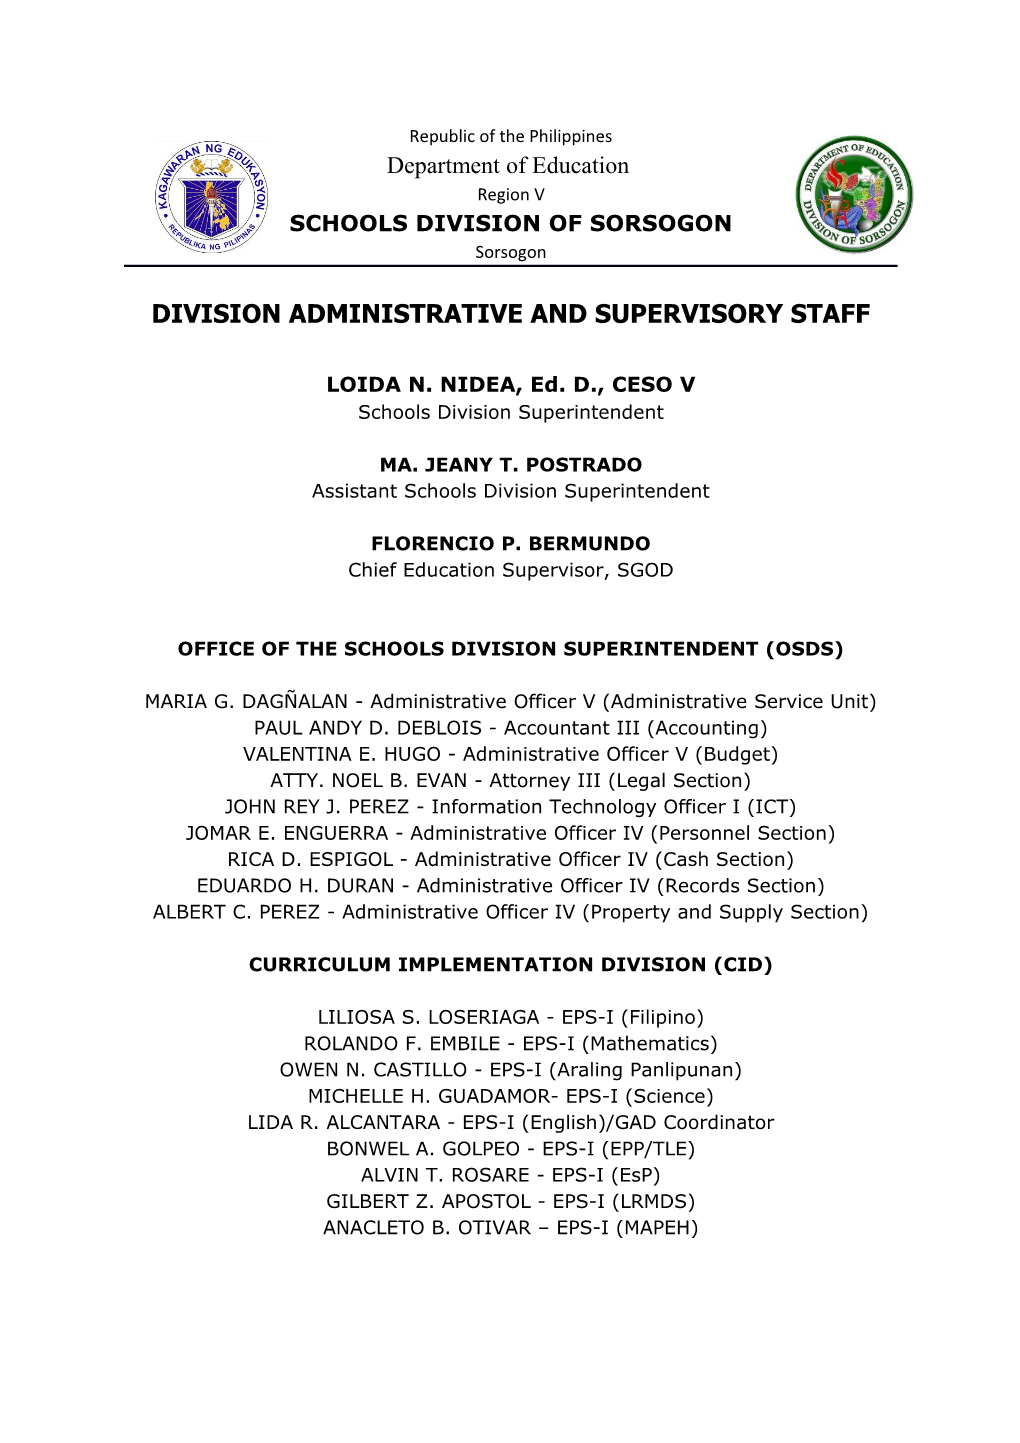 Division Administrative and Supervisory Staff